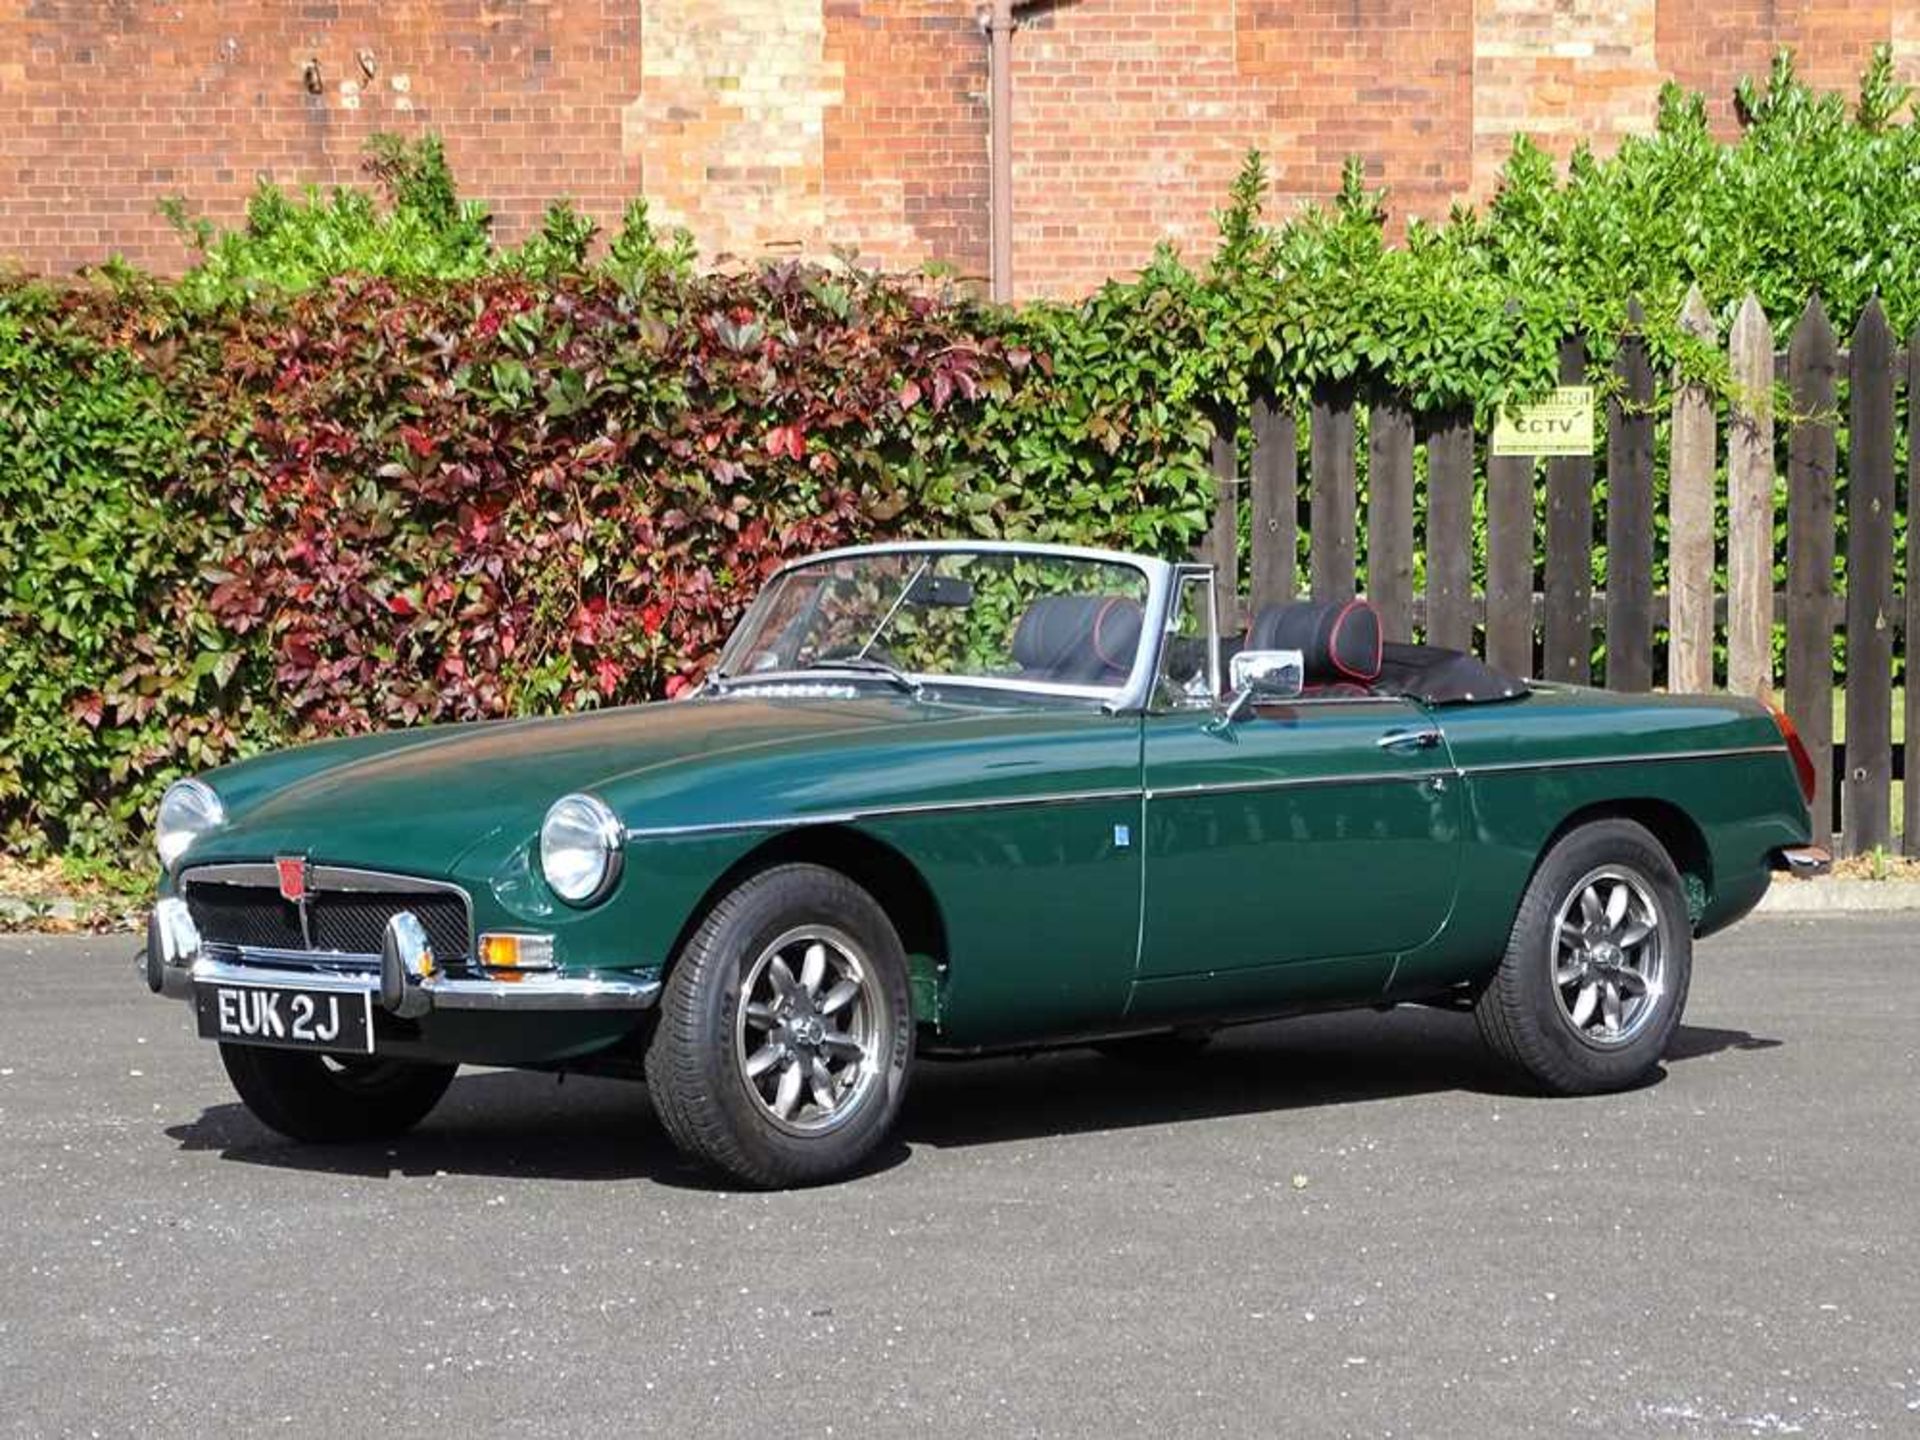 1971 MG B Roadster Restored at a cost of c.£33,000 - Image 6 of 43